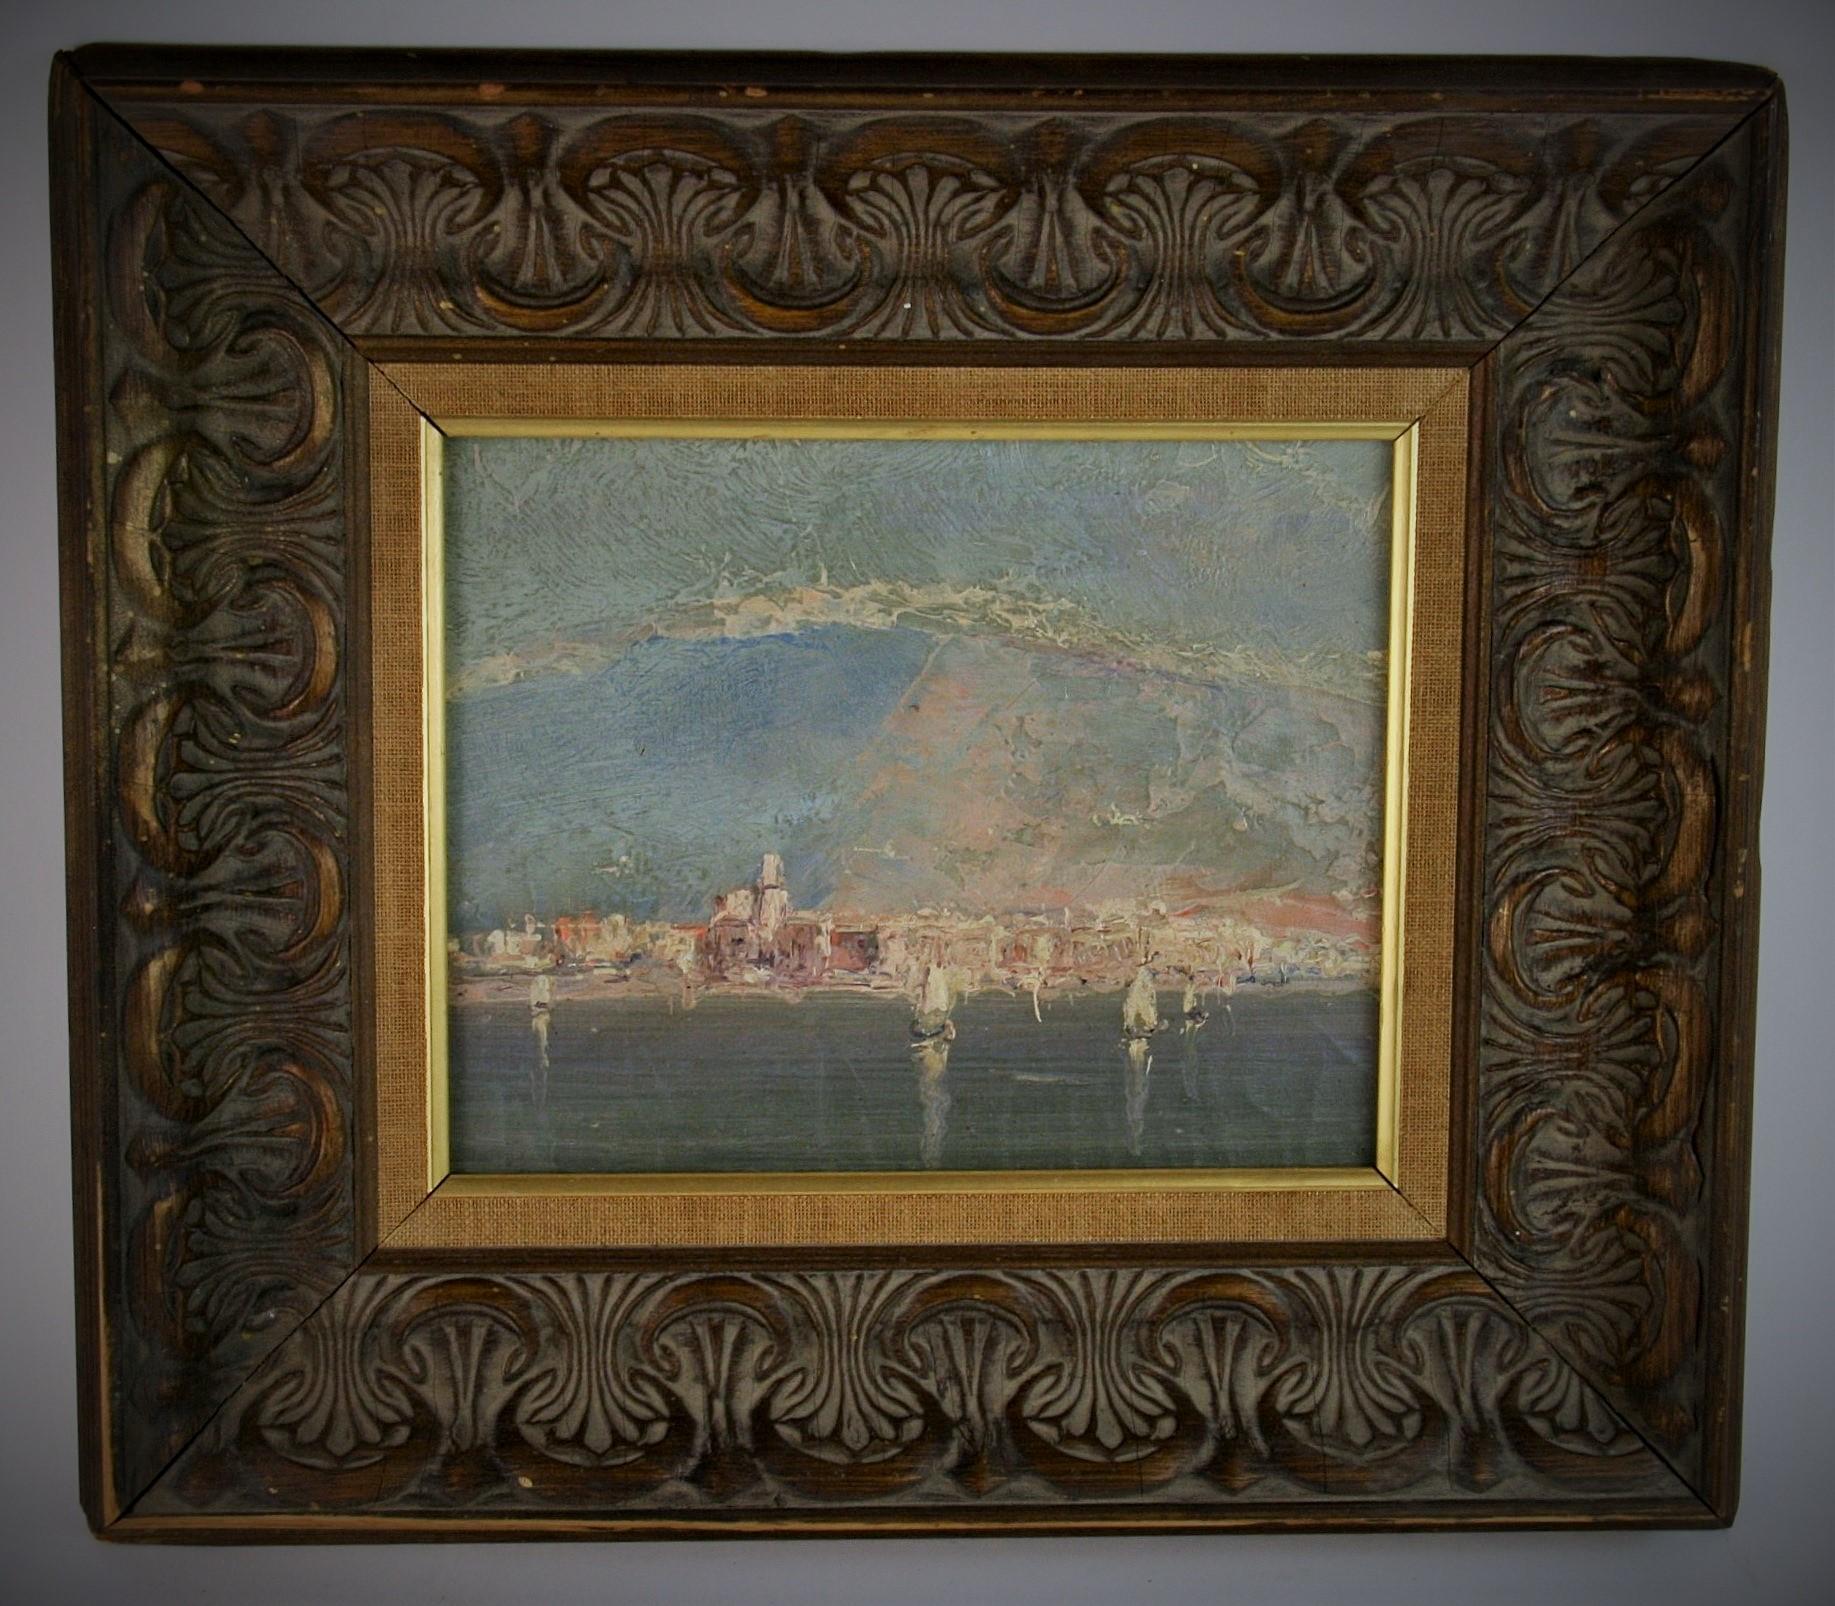 3766 Italian oil painting coastline painting
Set in a hand carved wood frame
Image size 7.5x9.5